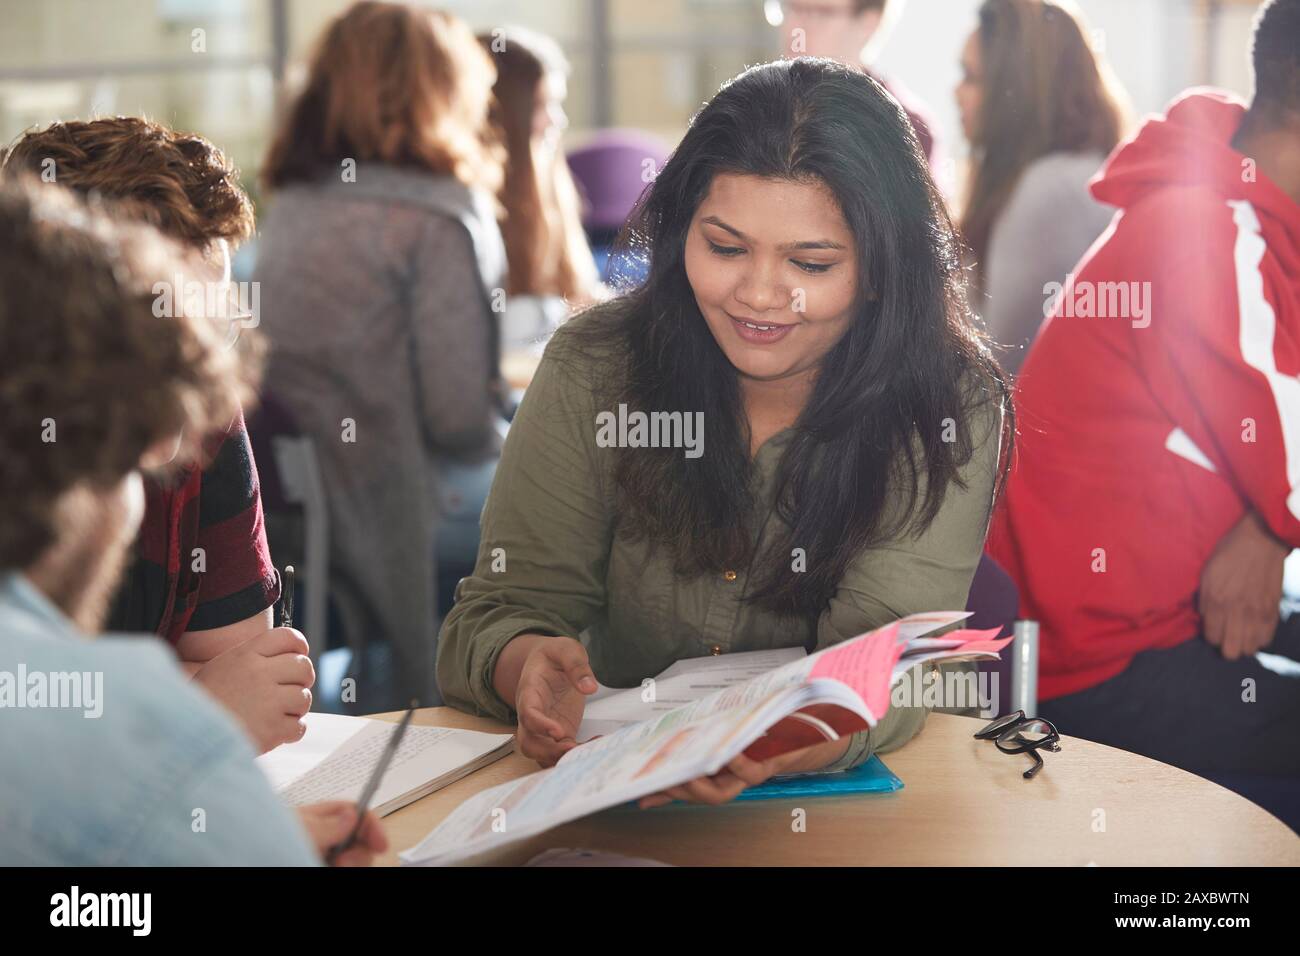 Smiling high school girl student studying with classmates Stock Photo